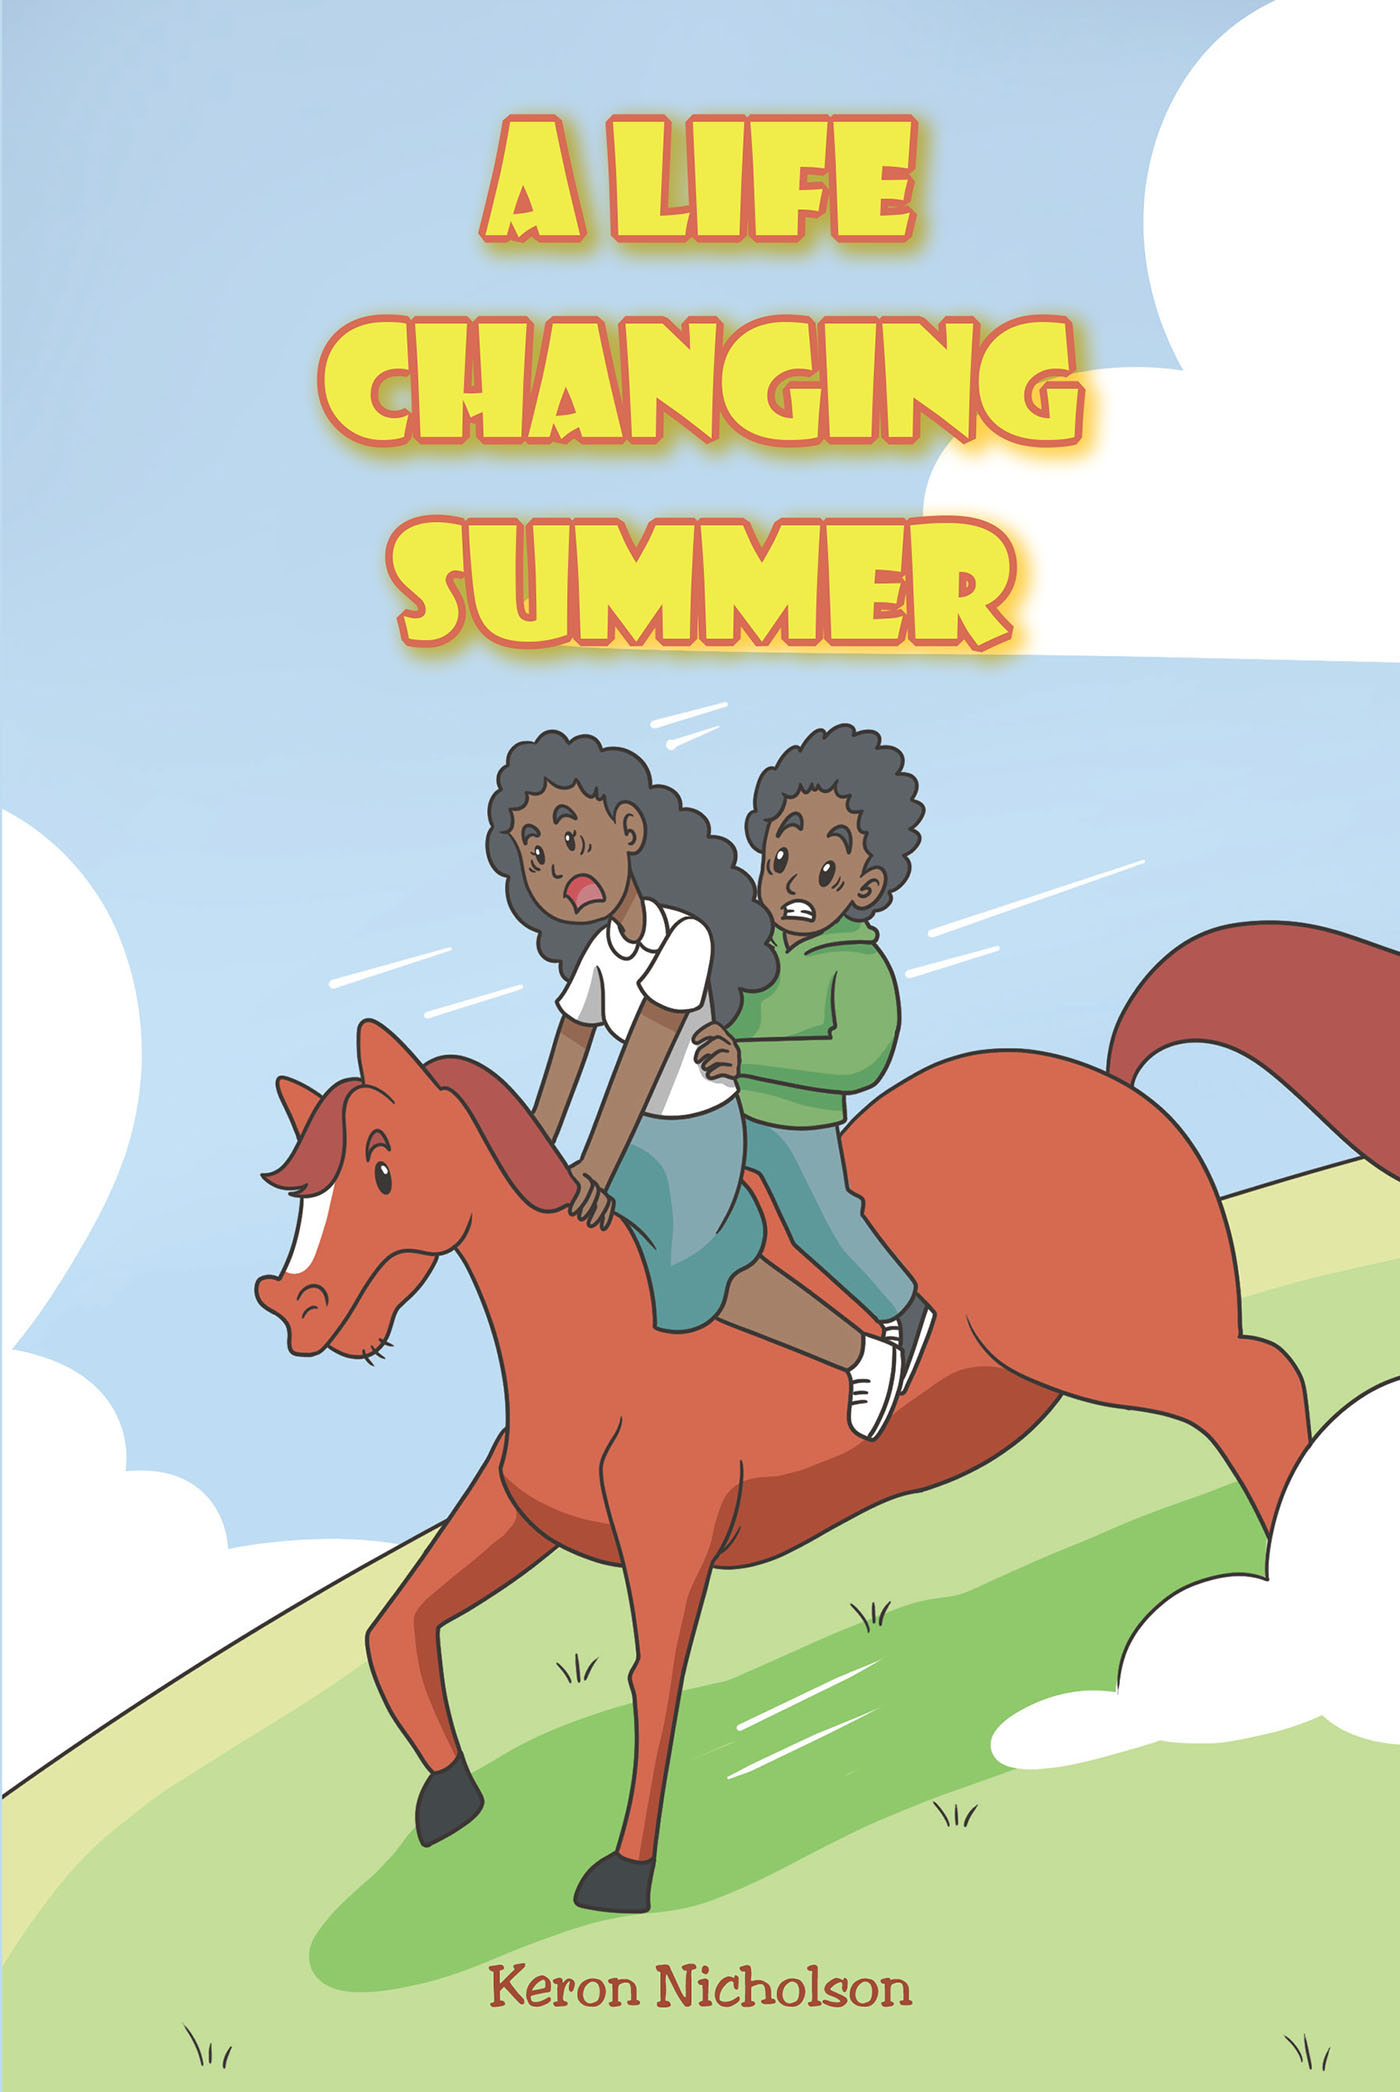 Keron Nicholson’s Newly Released "A Life Changing Summer" is a Unique Coming of Age Tale That Explores the Complexities of Life